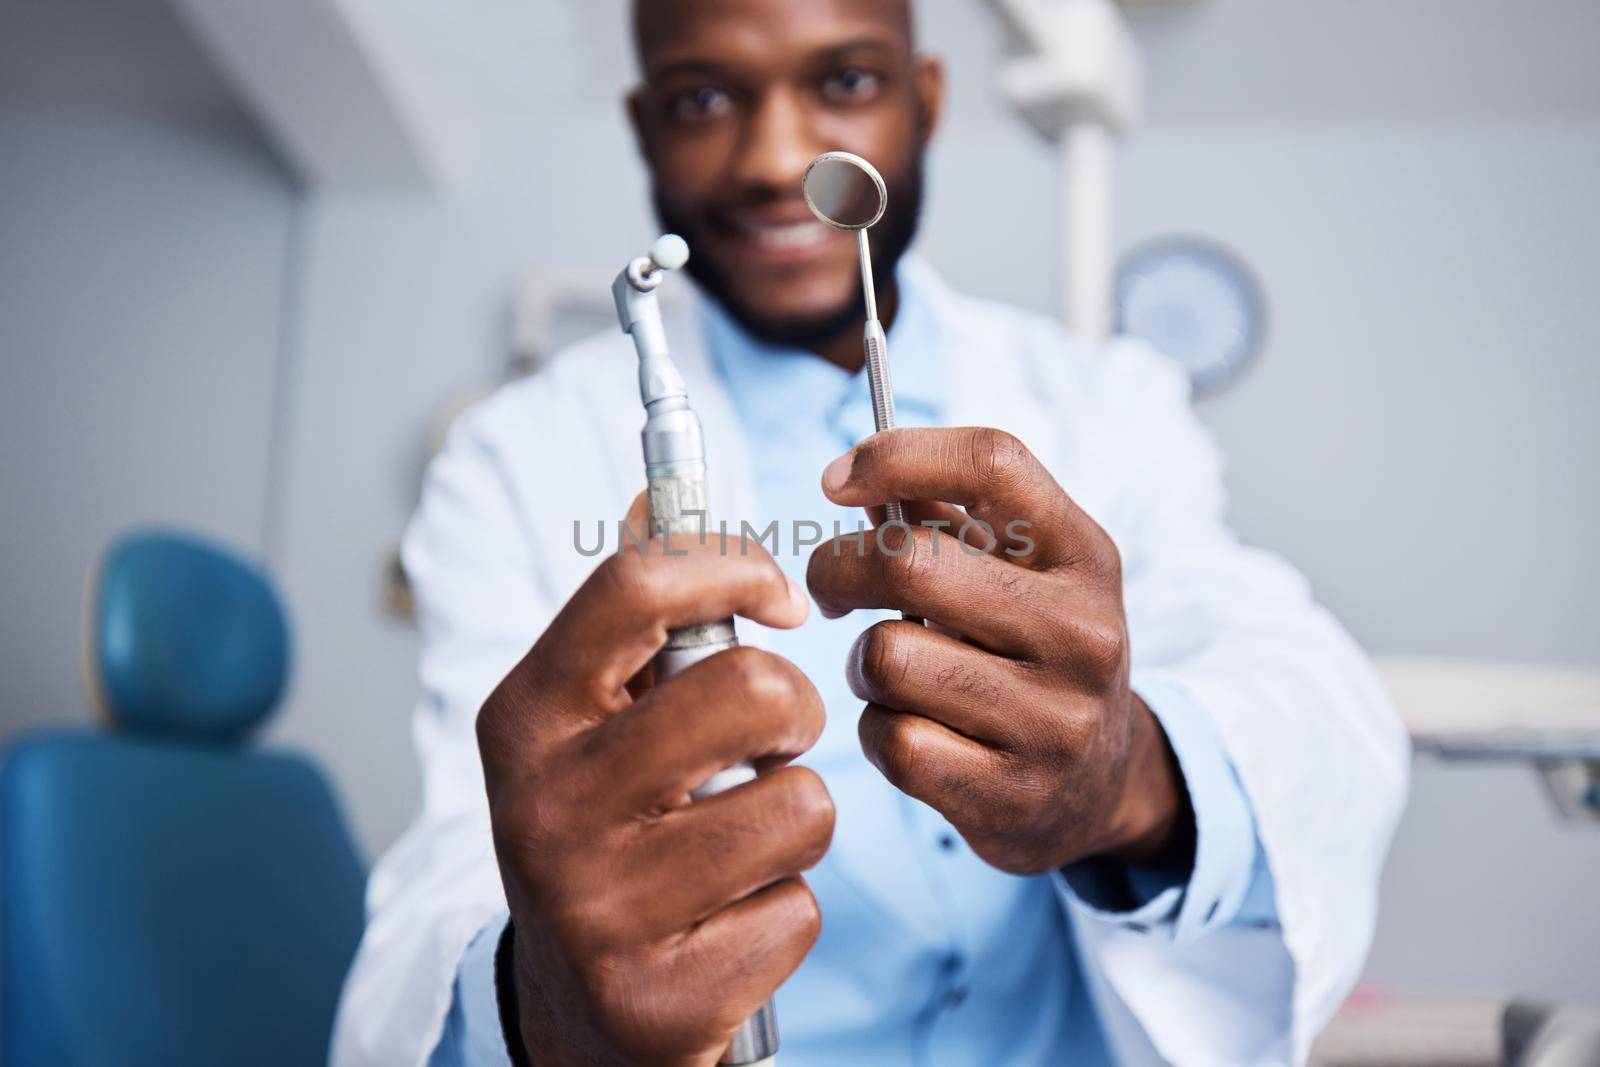 Portrait of a young man holding teeth cleaning tools in his dentists office.